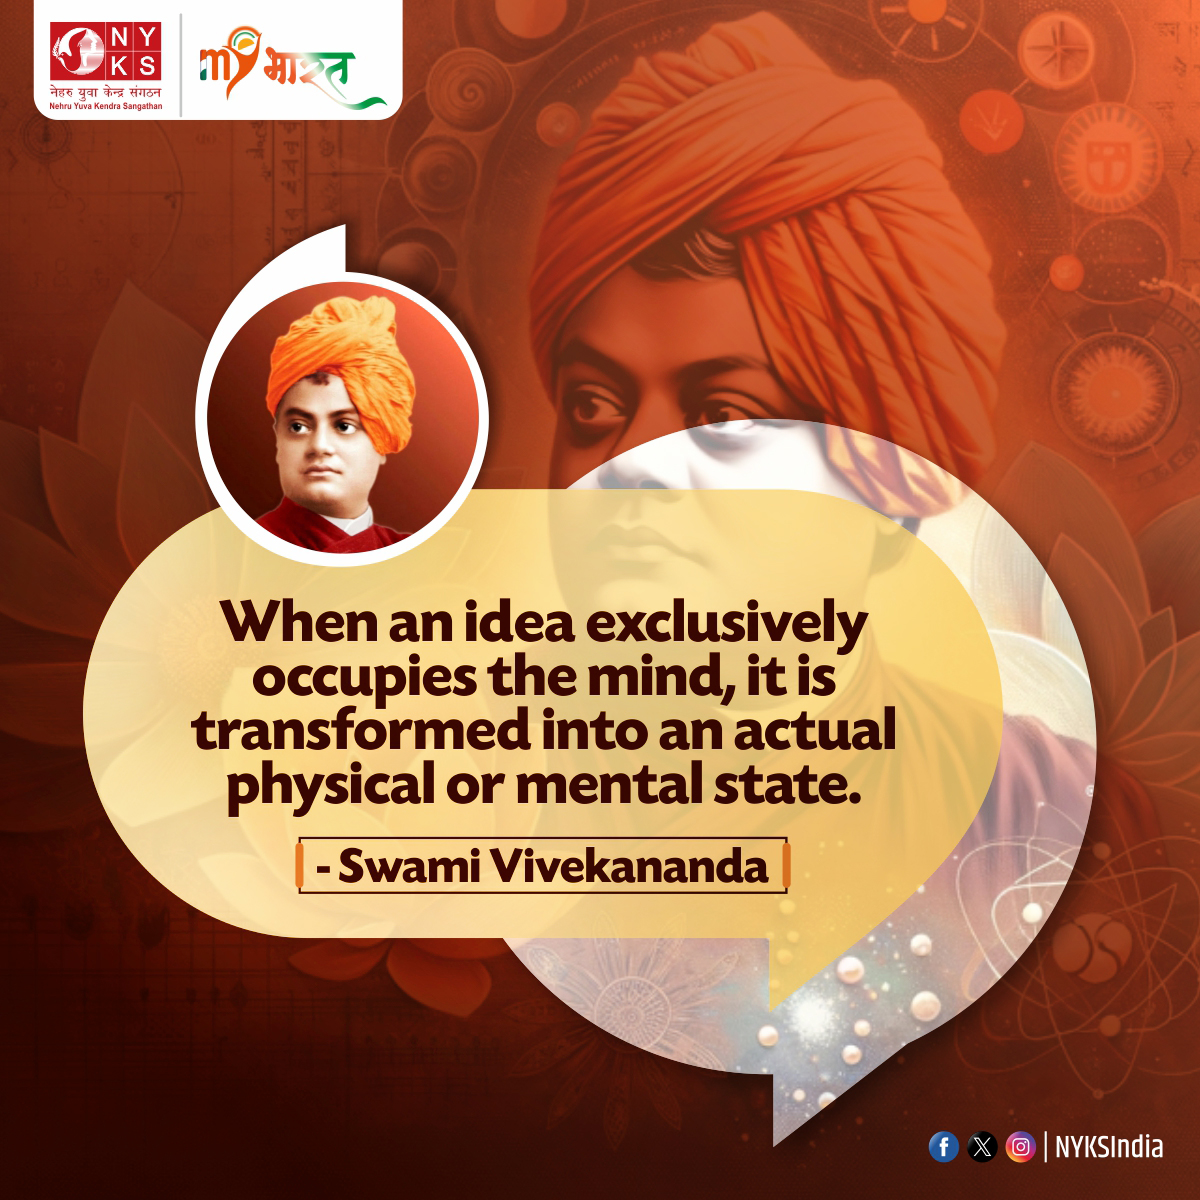 Quote of the Day! Let's harness the power of our thoughts to manifest positive change in our lives. #SwamiVivekananda #quoteoftheday #Motivation #thoughtoftheday #NYKS